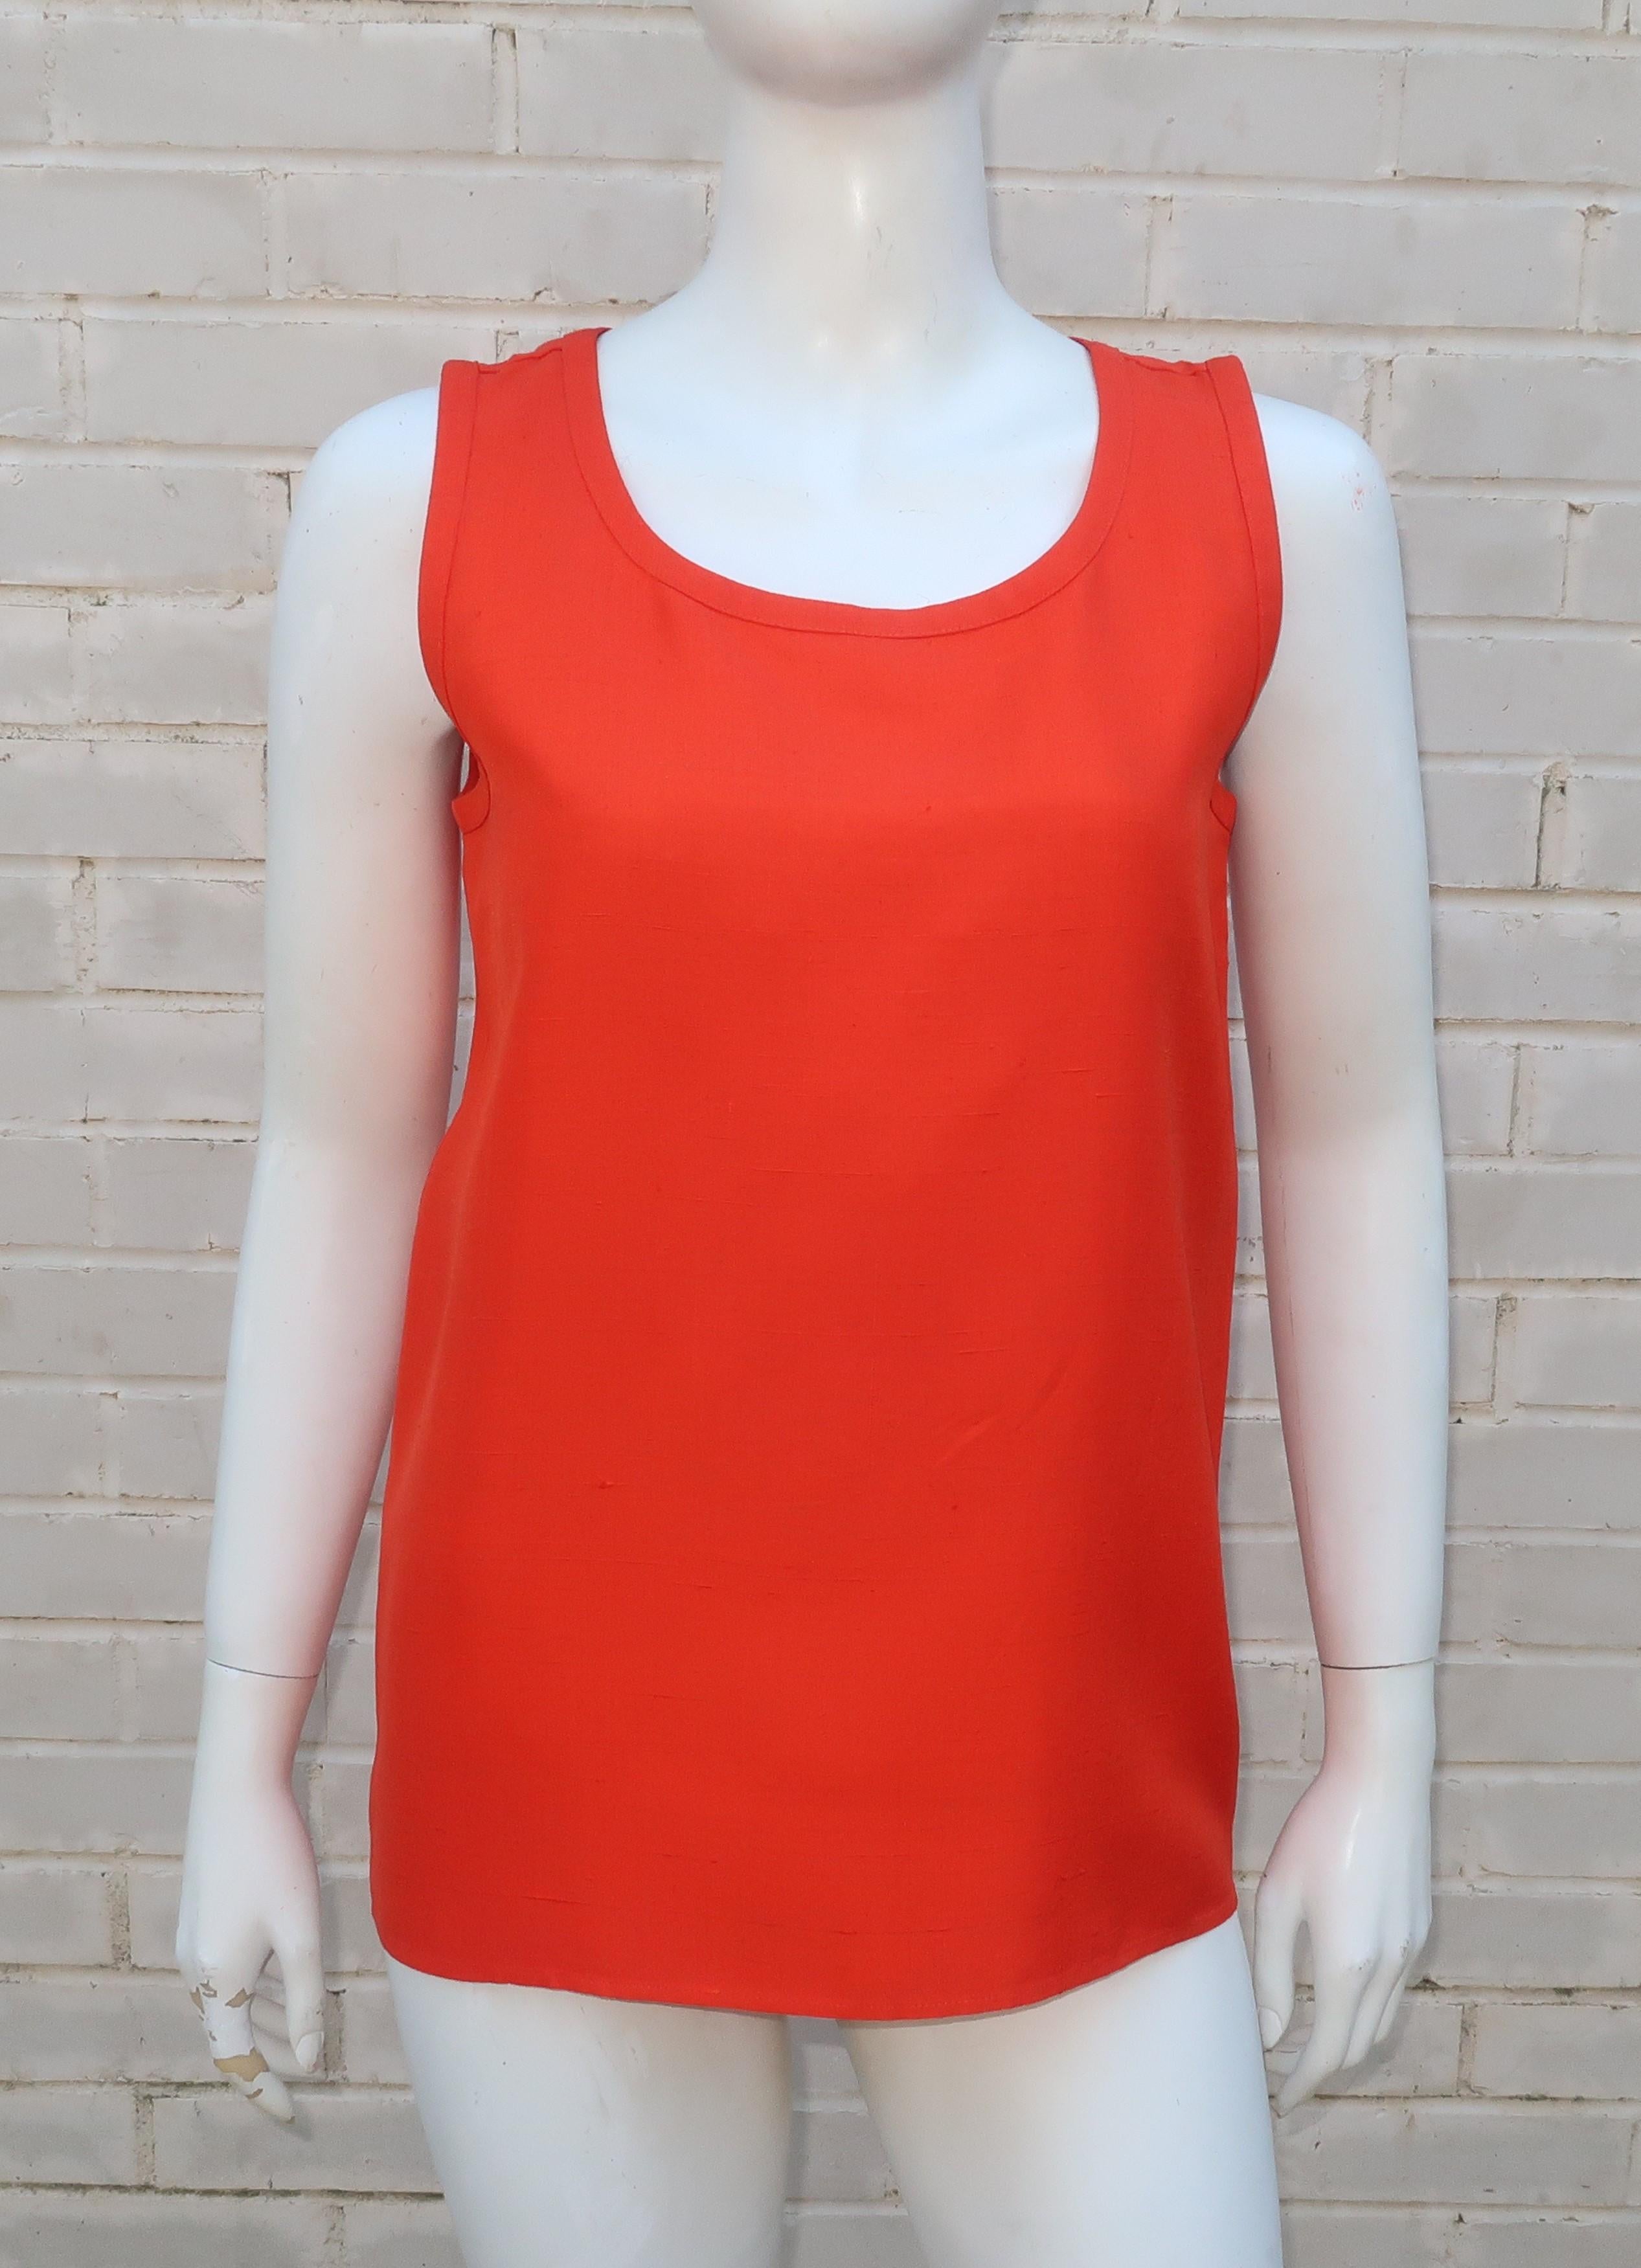 The vibrant orange shade of this simple Yves Saint Laurent Rive Gauche sleeveless blouse will add a color pop to anything and everything.  Fabricated from a beautiful nubby raw silk that offers both texture and a crisp appearance for a stand alone